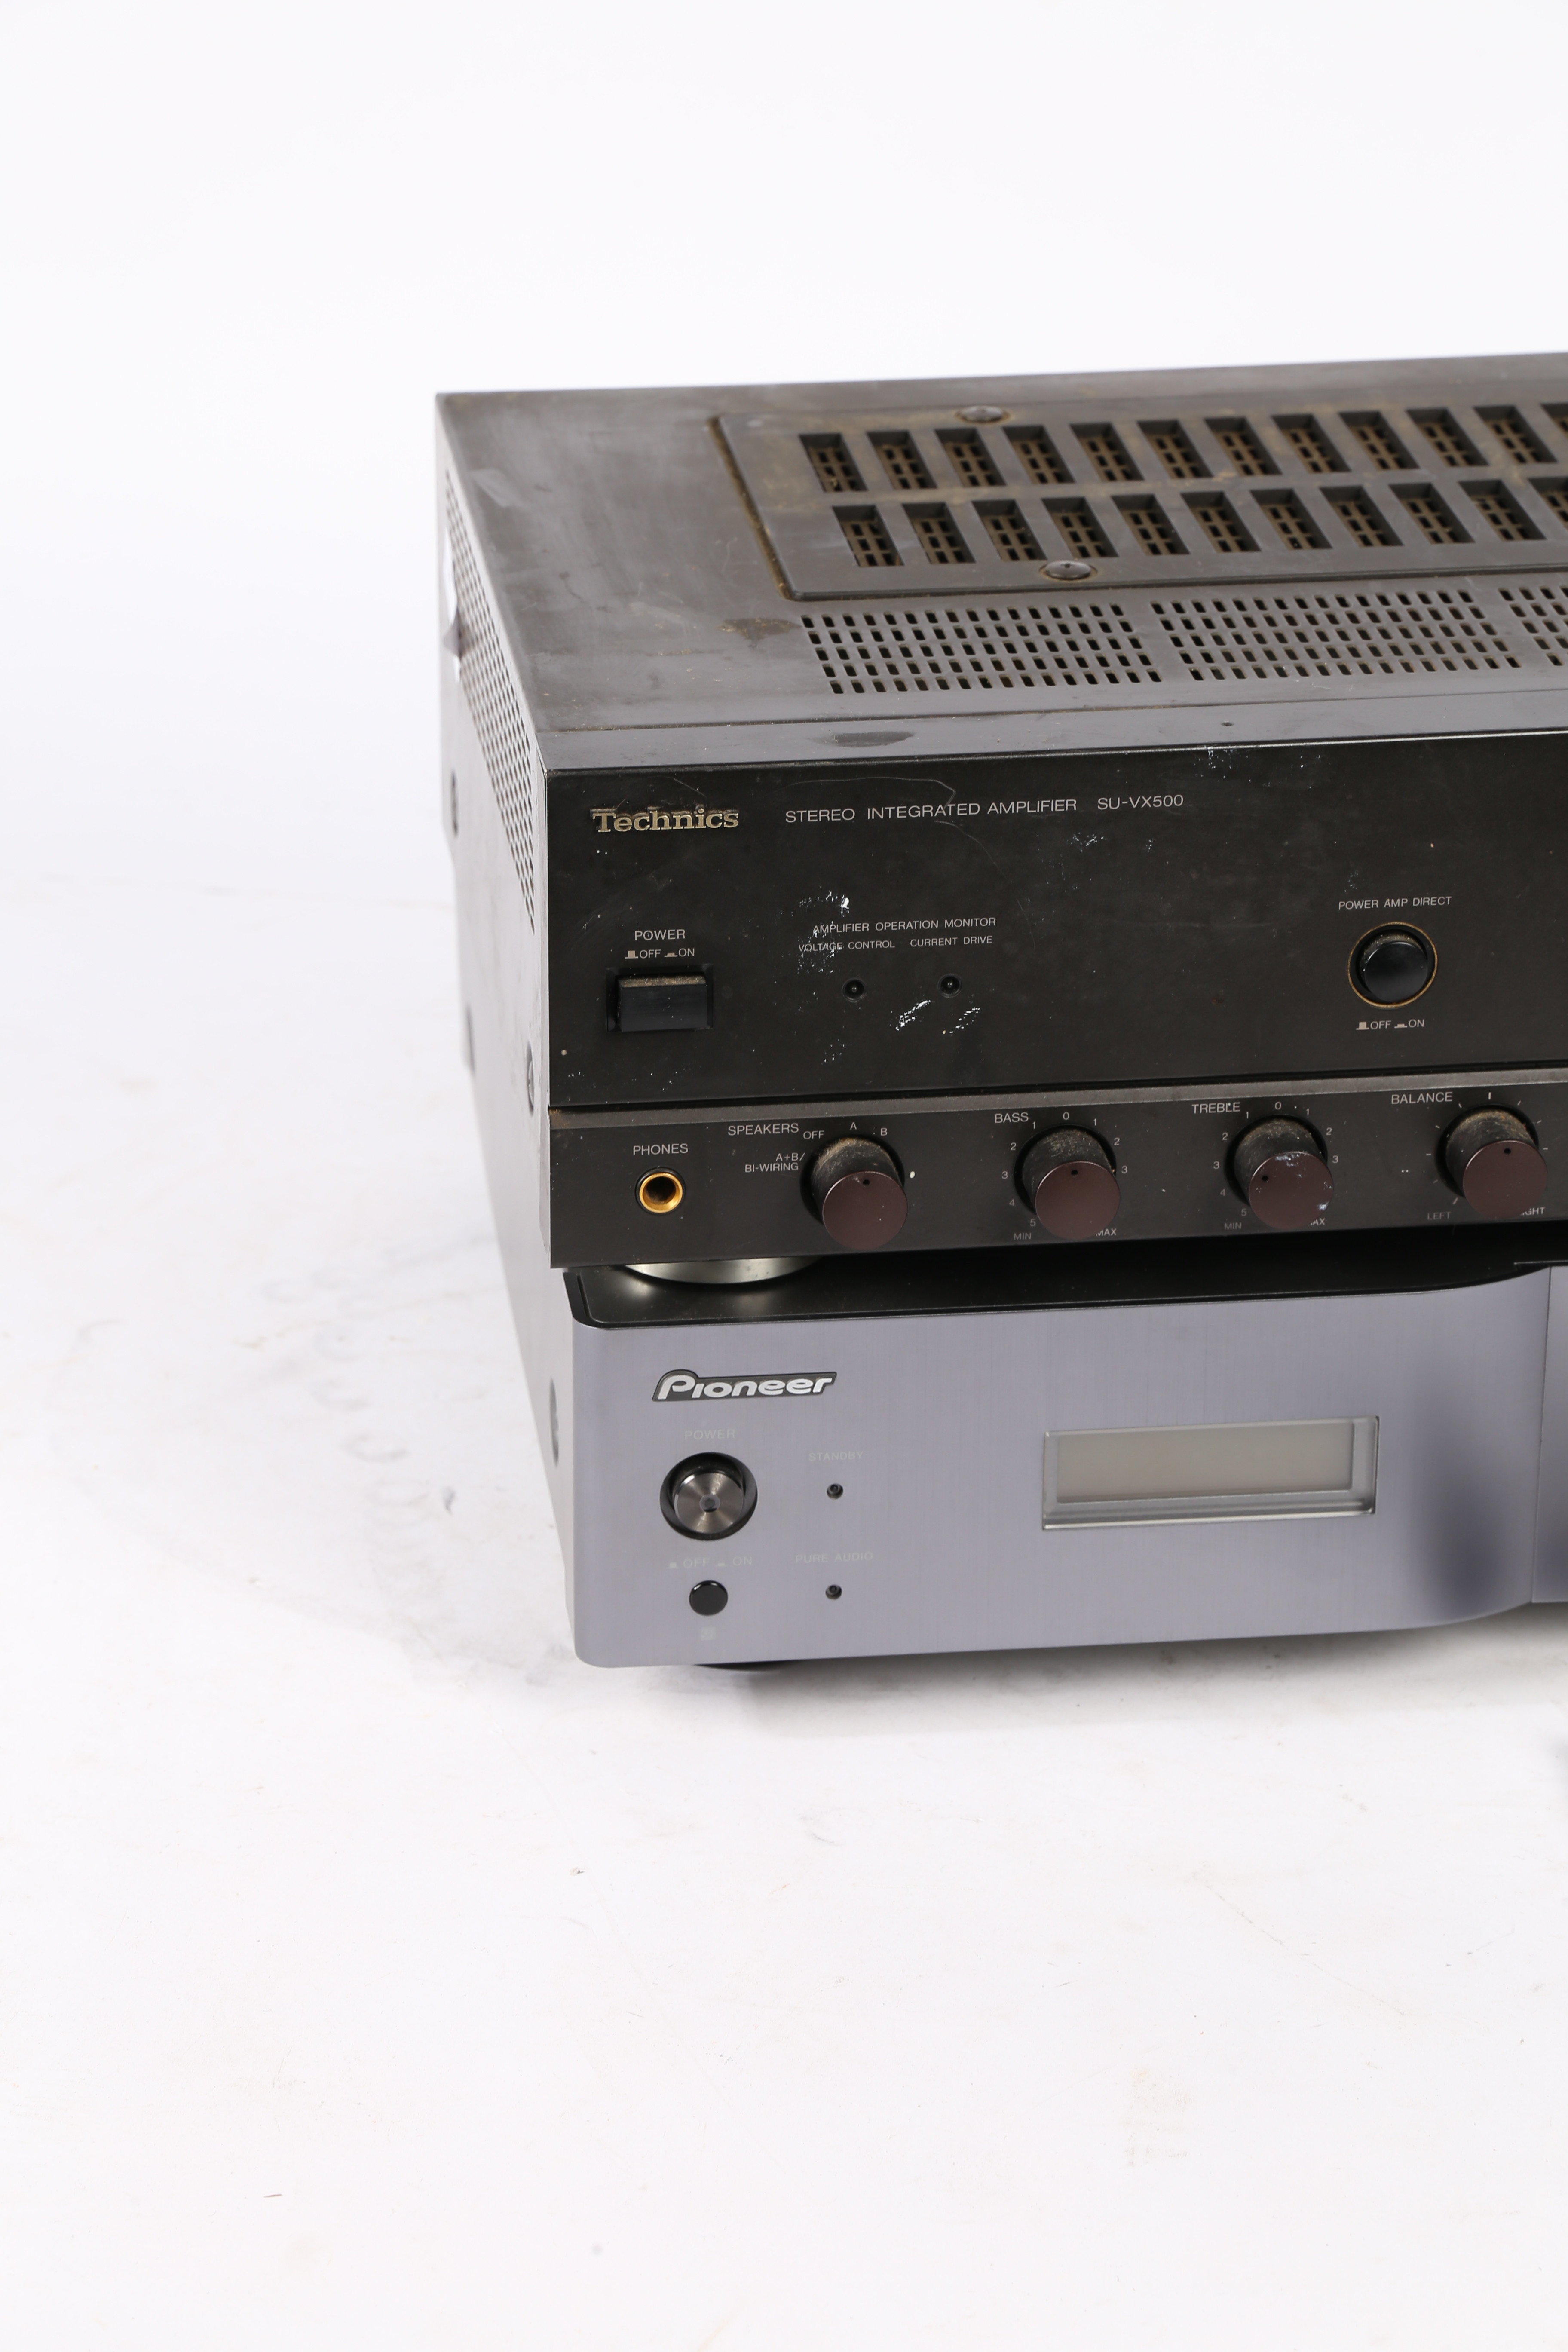 A TECHNICS AMPLIFIER, A PIONEER CD PLAYER (2). - Image 4 of 4